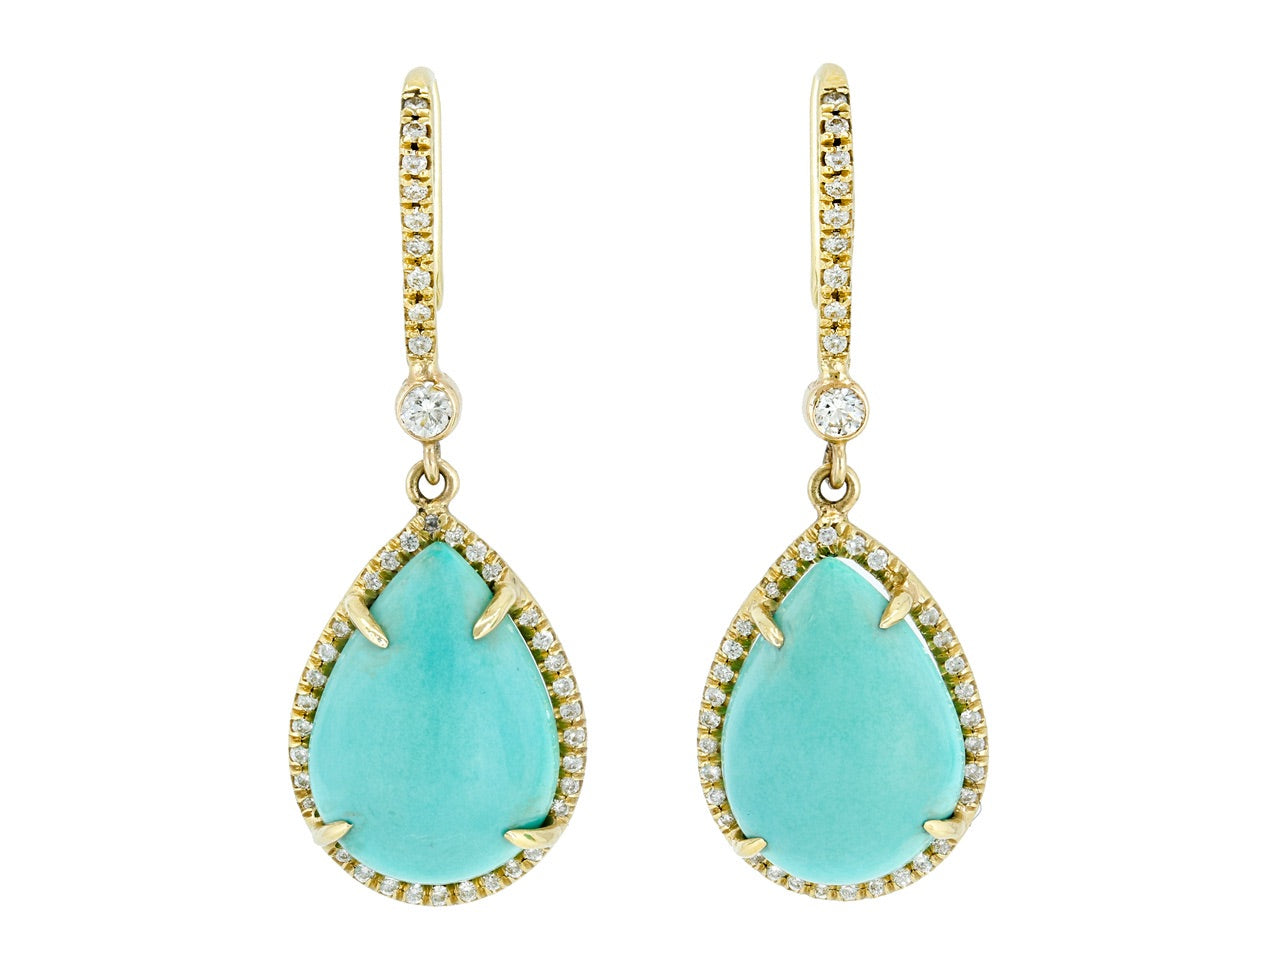 Turquoise and Diamond Drop Earrings in 18K Gold